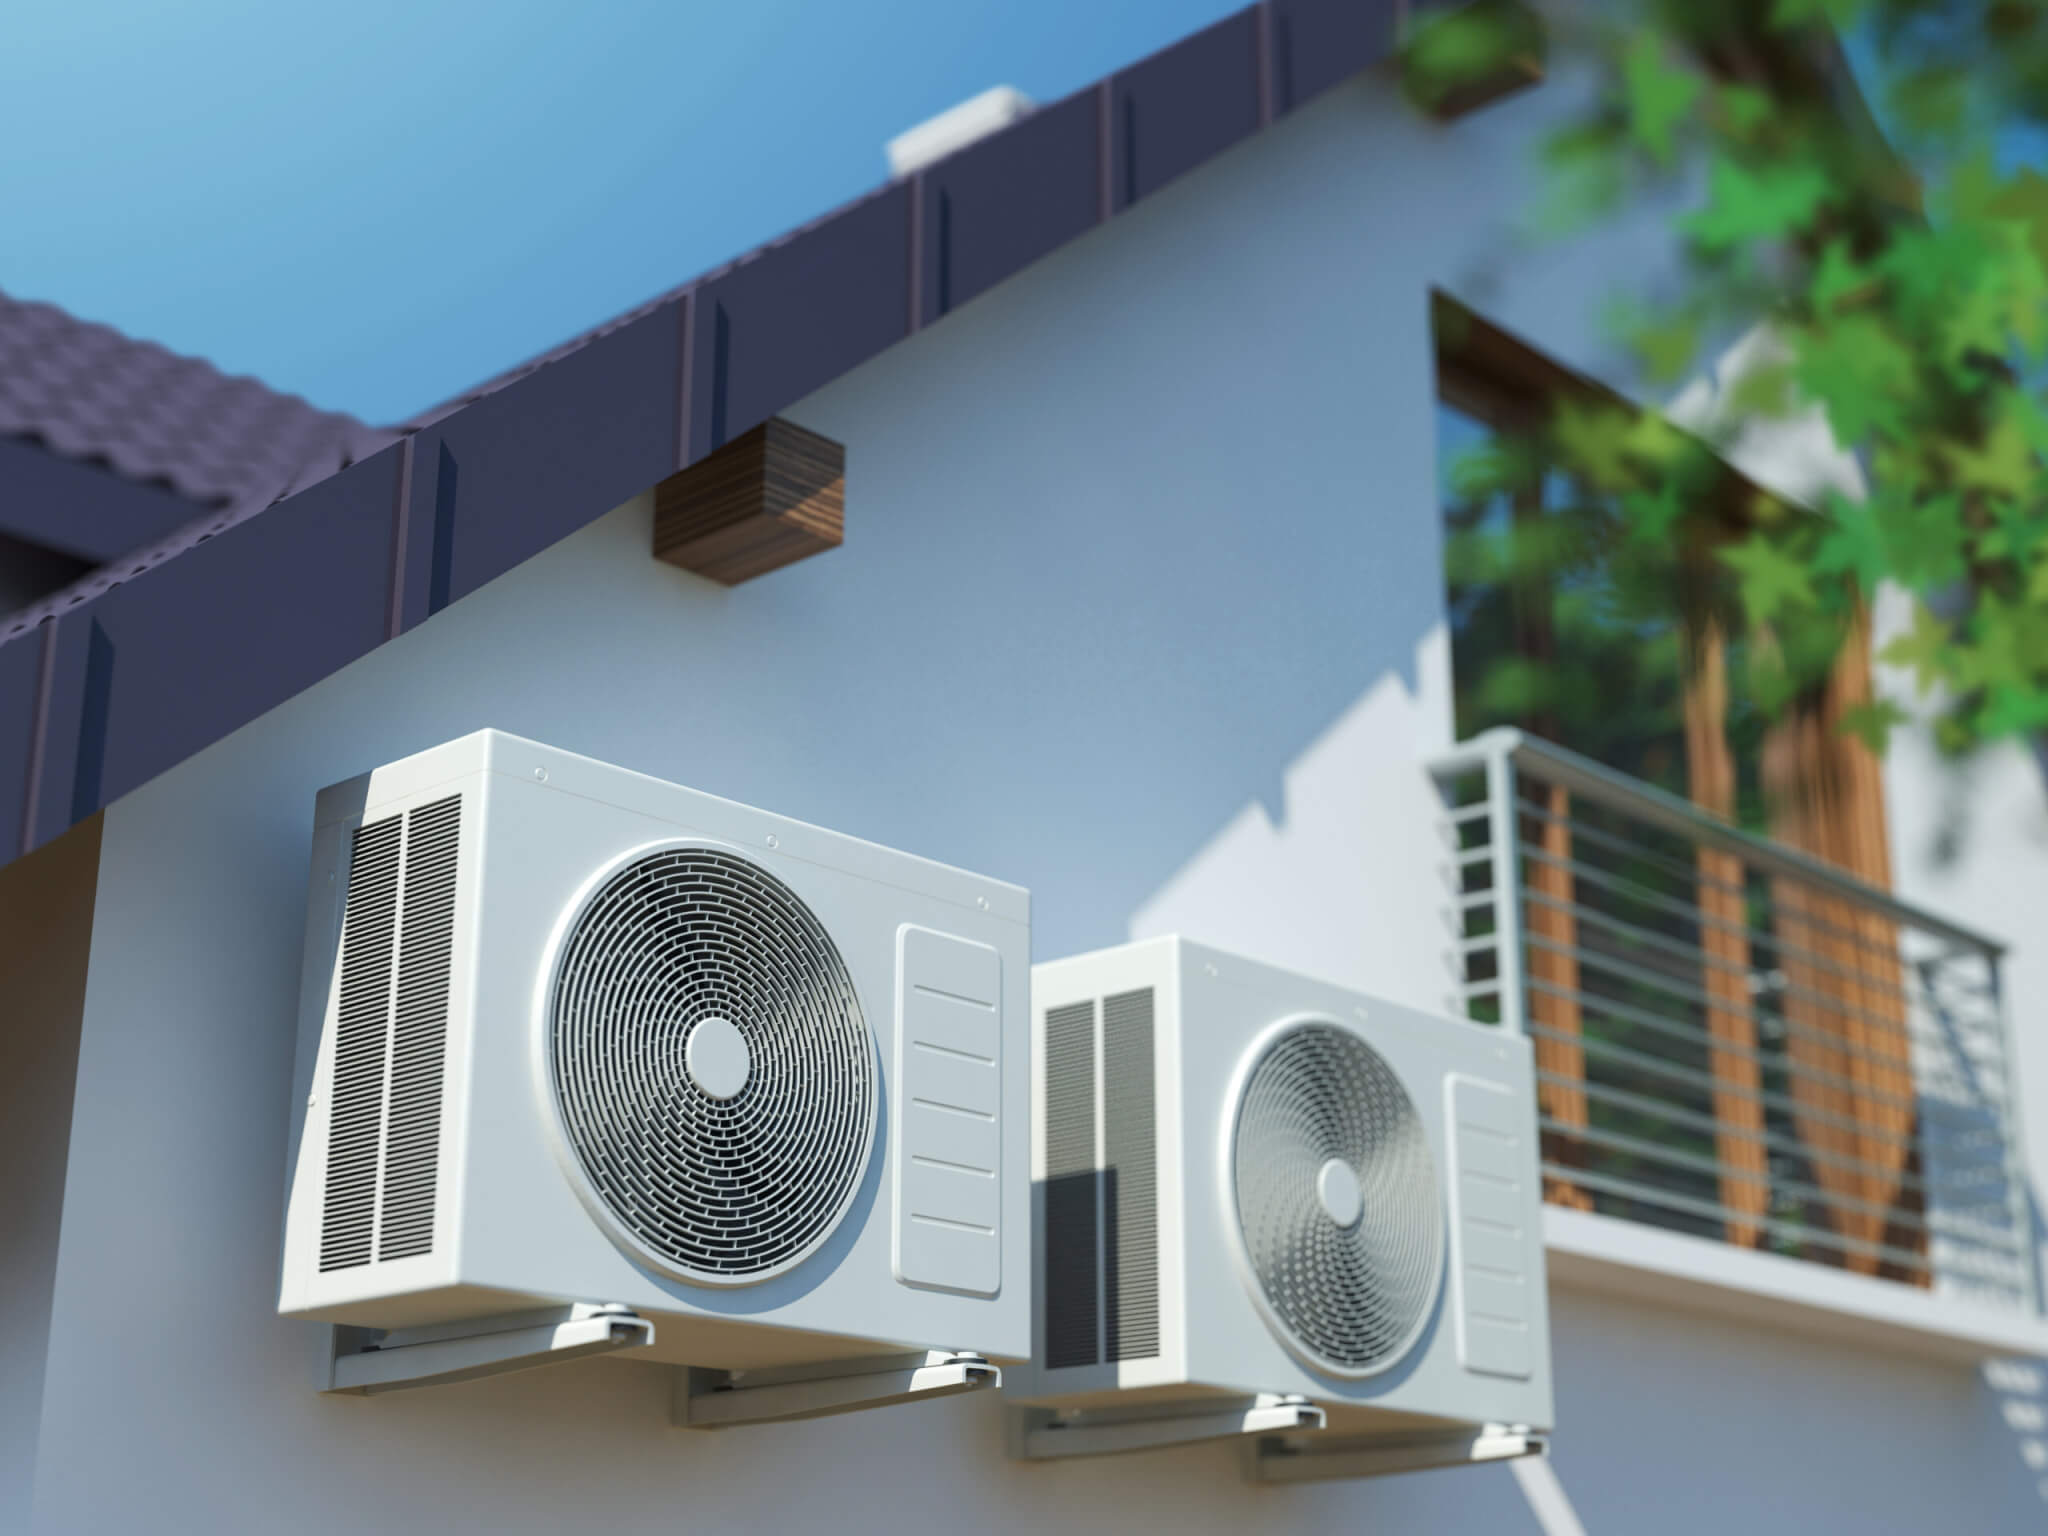 How To Protect An AC Outdoor Unit From Sunlight